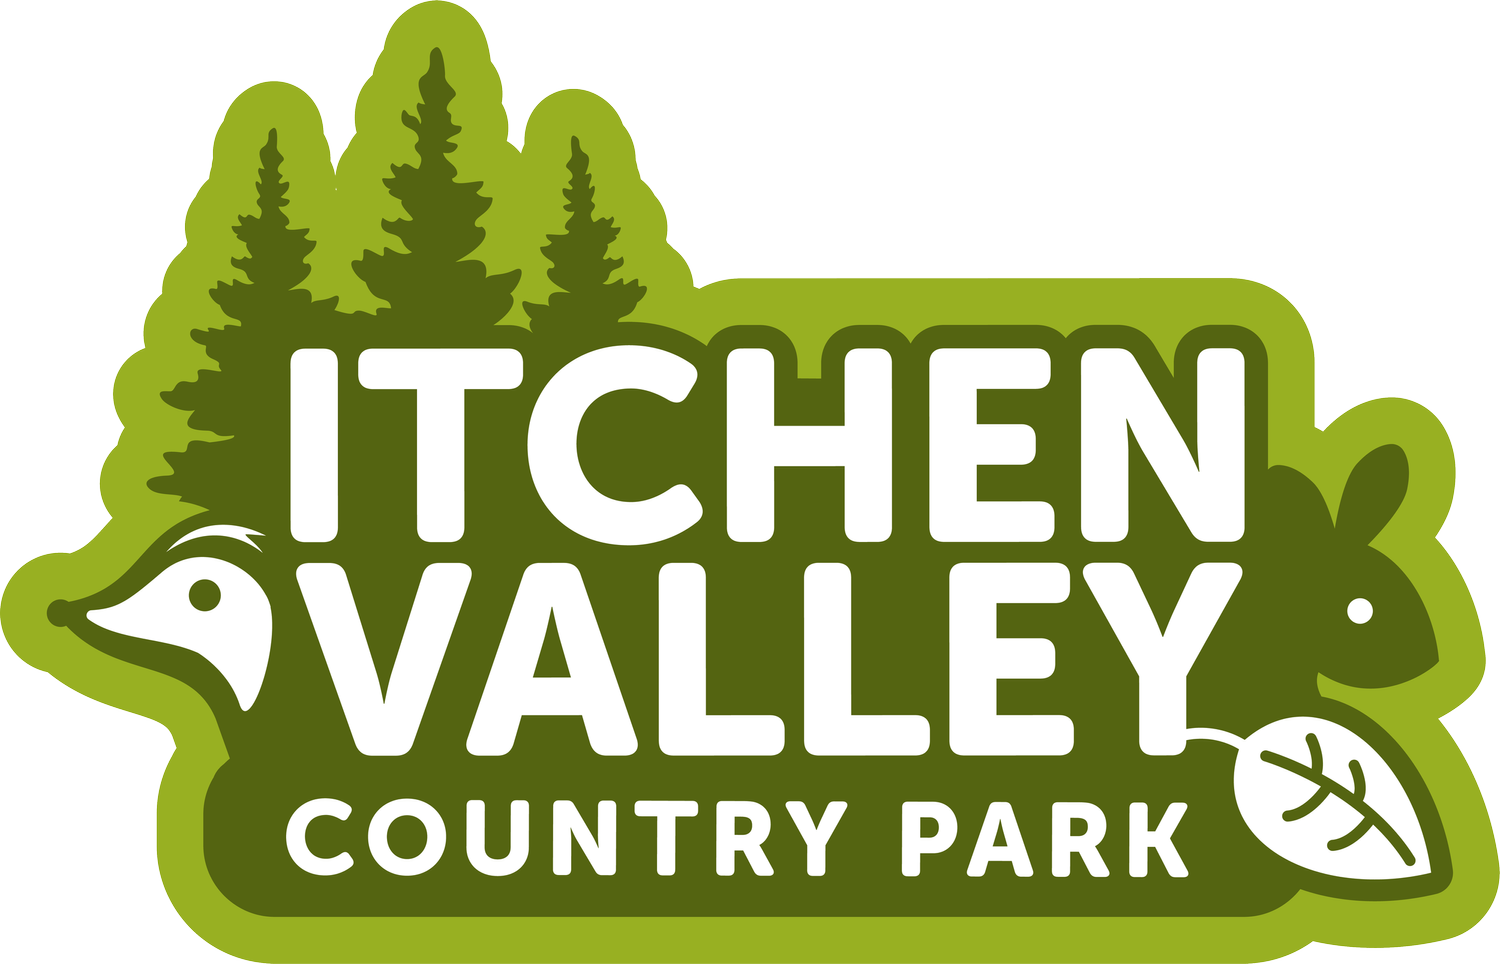 Itchen Valley Country Park